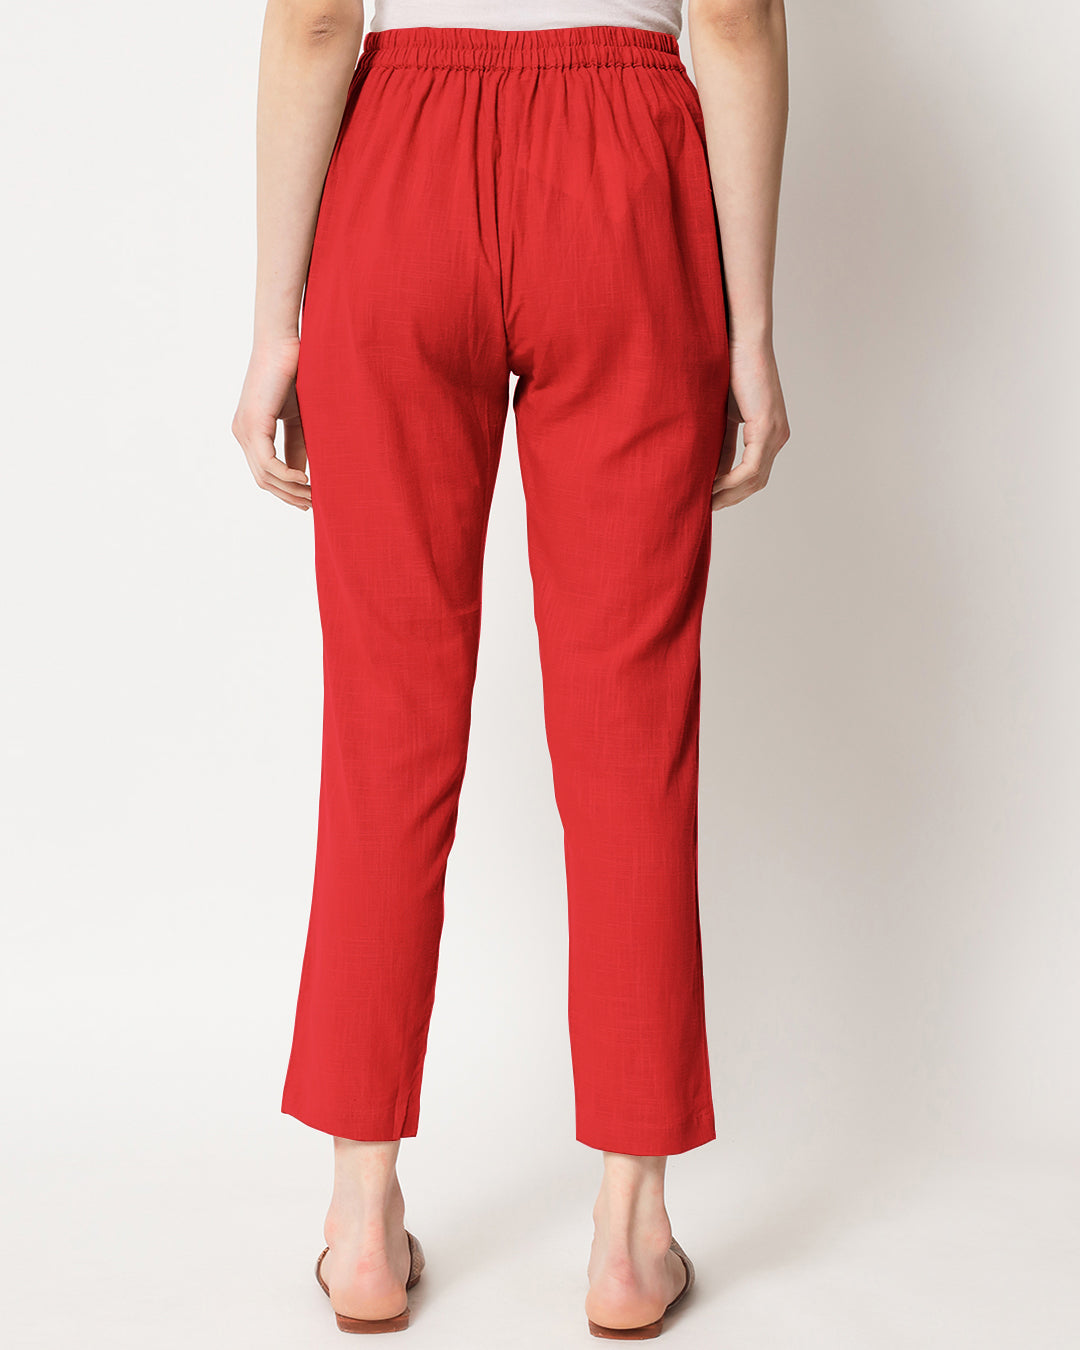 Classic Red Cigarette Pants